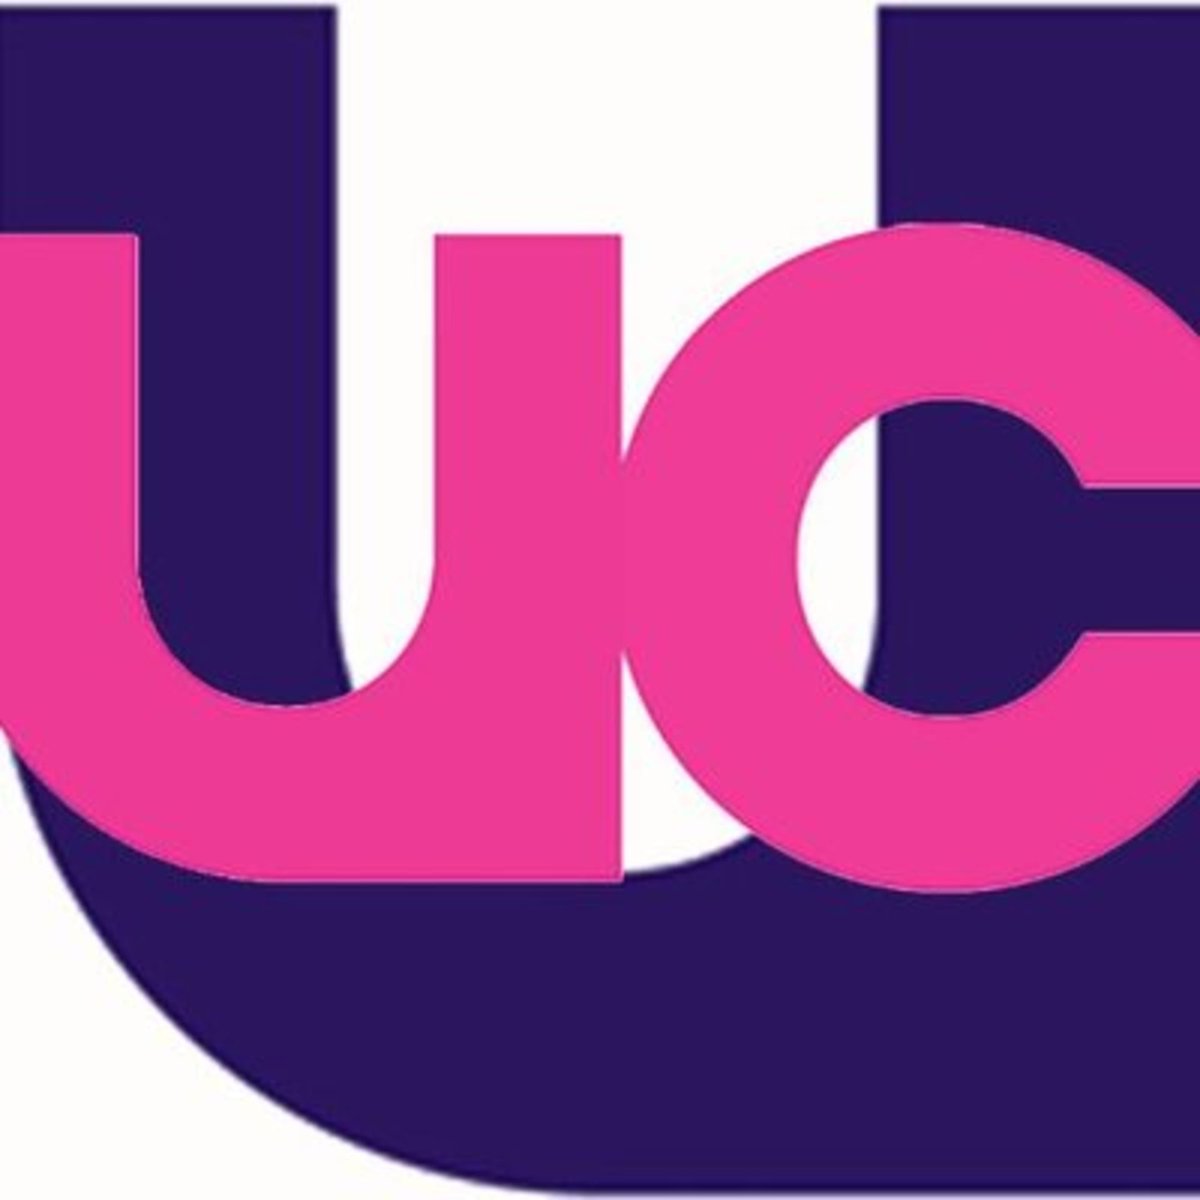  @ucu signed our open letter against the Nordic Model University and College Union, UK trade union for academics, lecturers, trainers, researchers & academic-related staff in further and higher education.Read the letter here  https://decrimnow.org.uk/open-letter-on-the-nordic-model/  #notonordicmodel